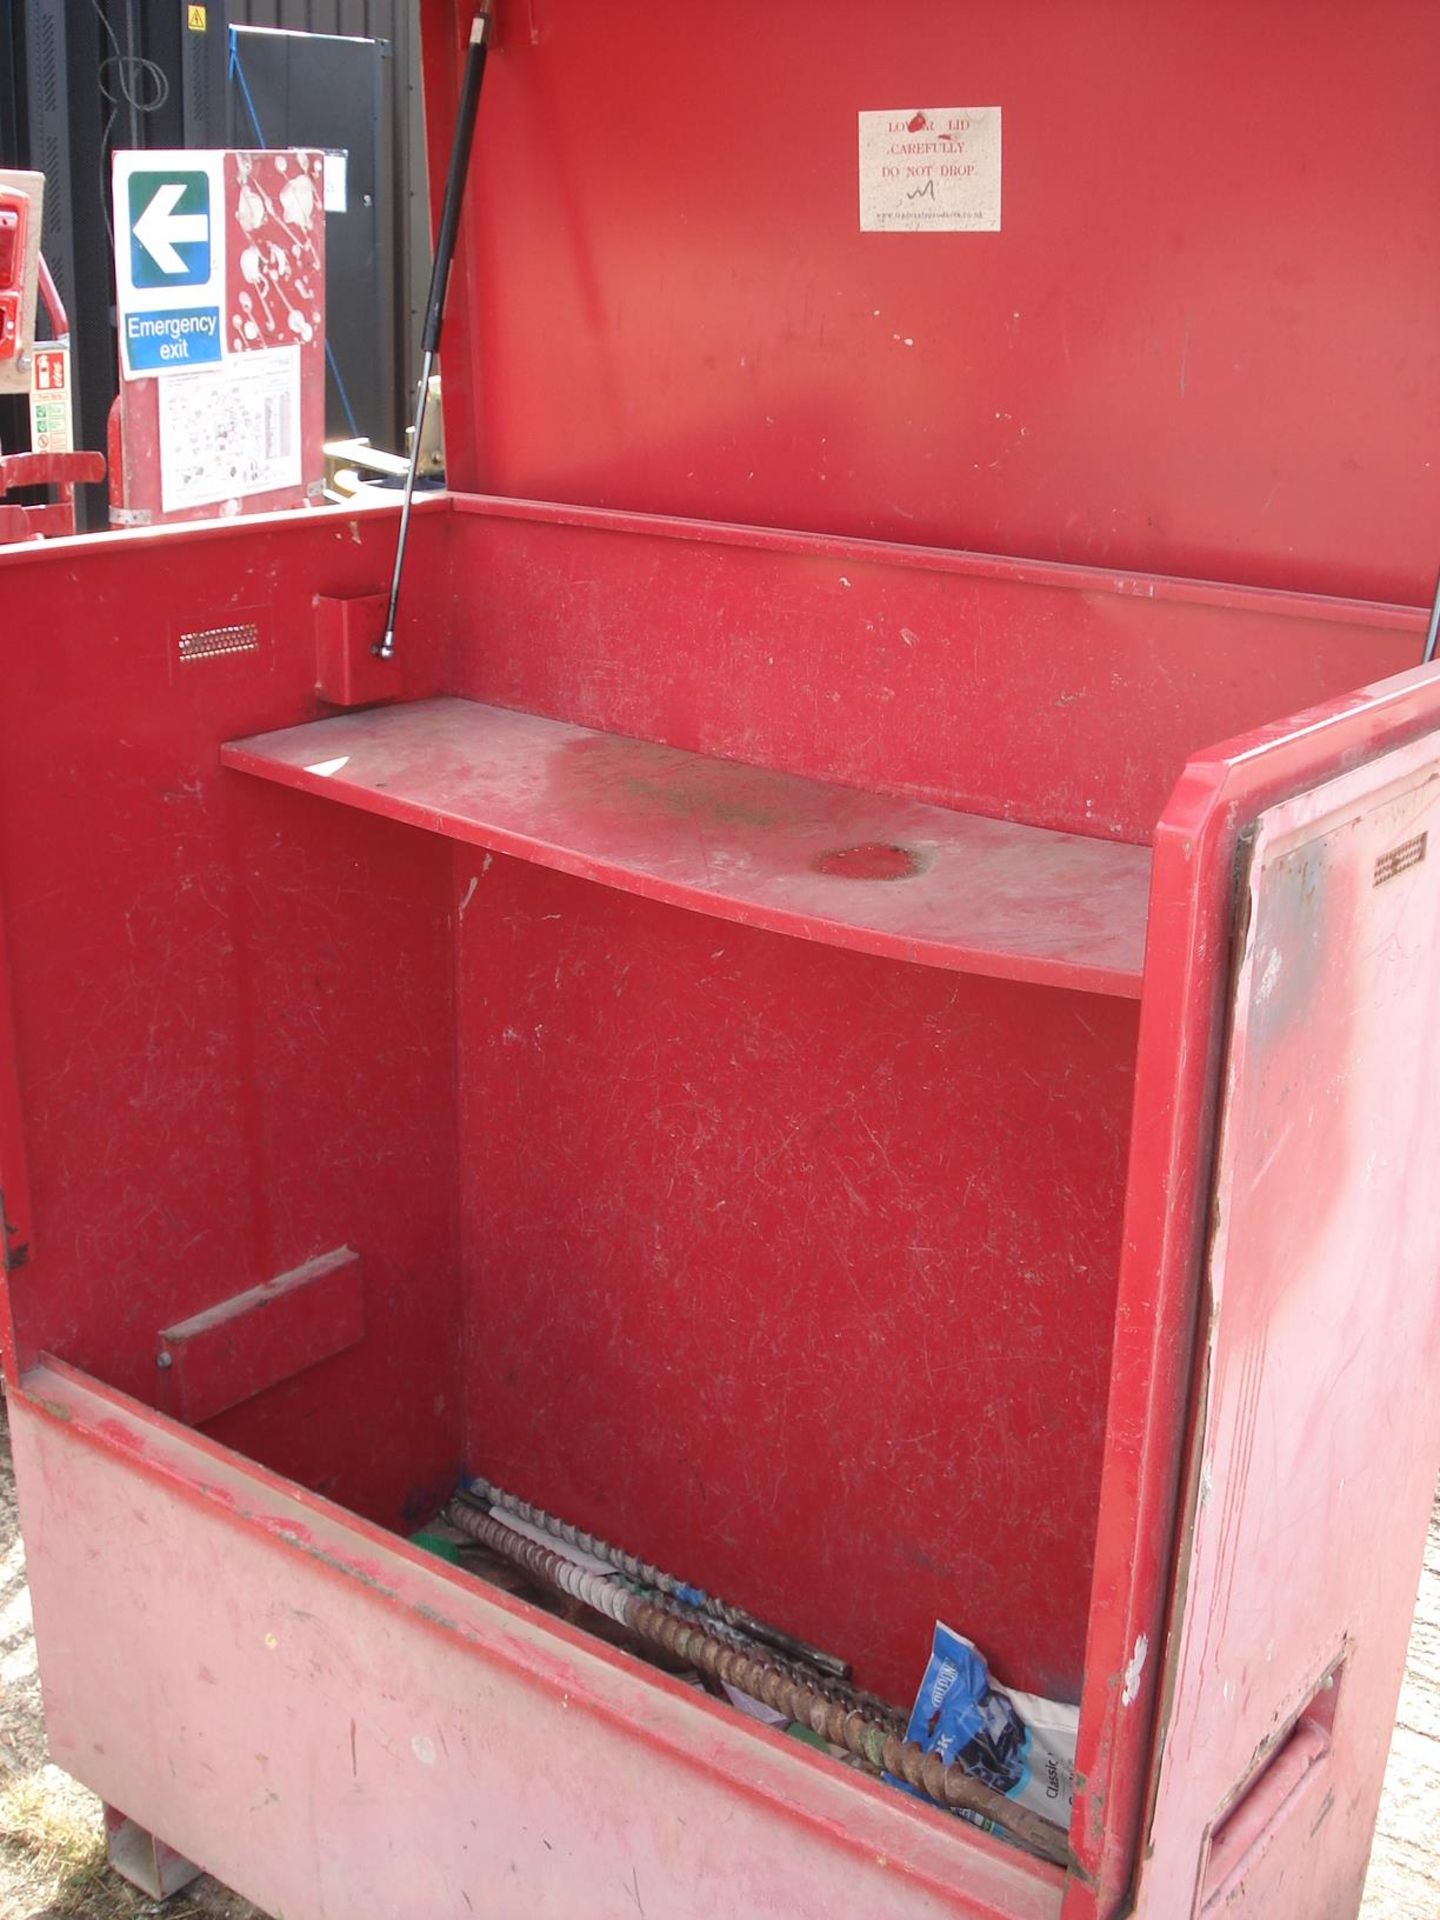 Tool Box/ChemStore - Unlocked - No Keys - 44 x 24 x 51 - Not on Wheels - Has some Large Drill Bits - Image 2 of 2